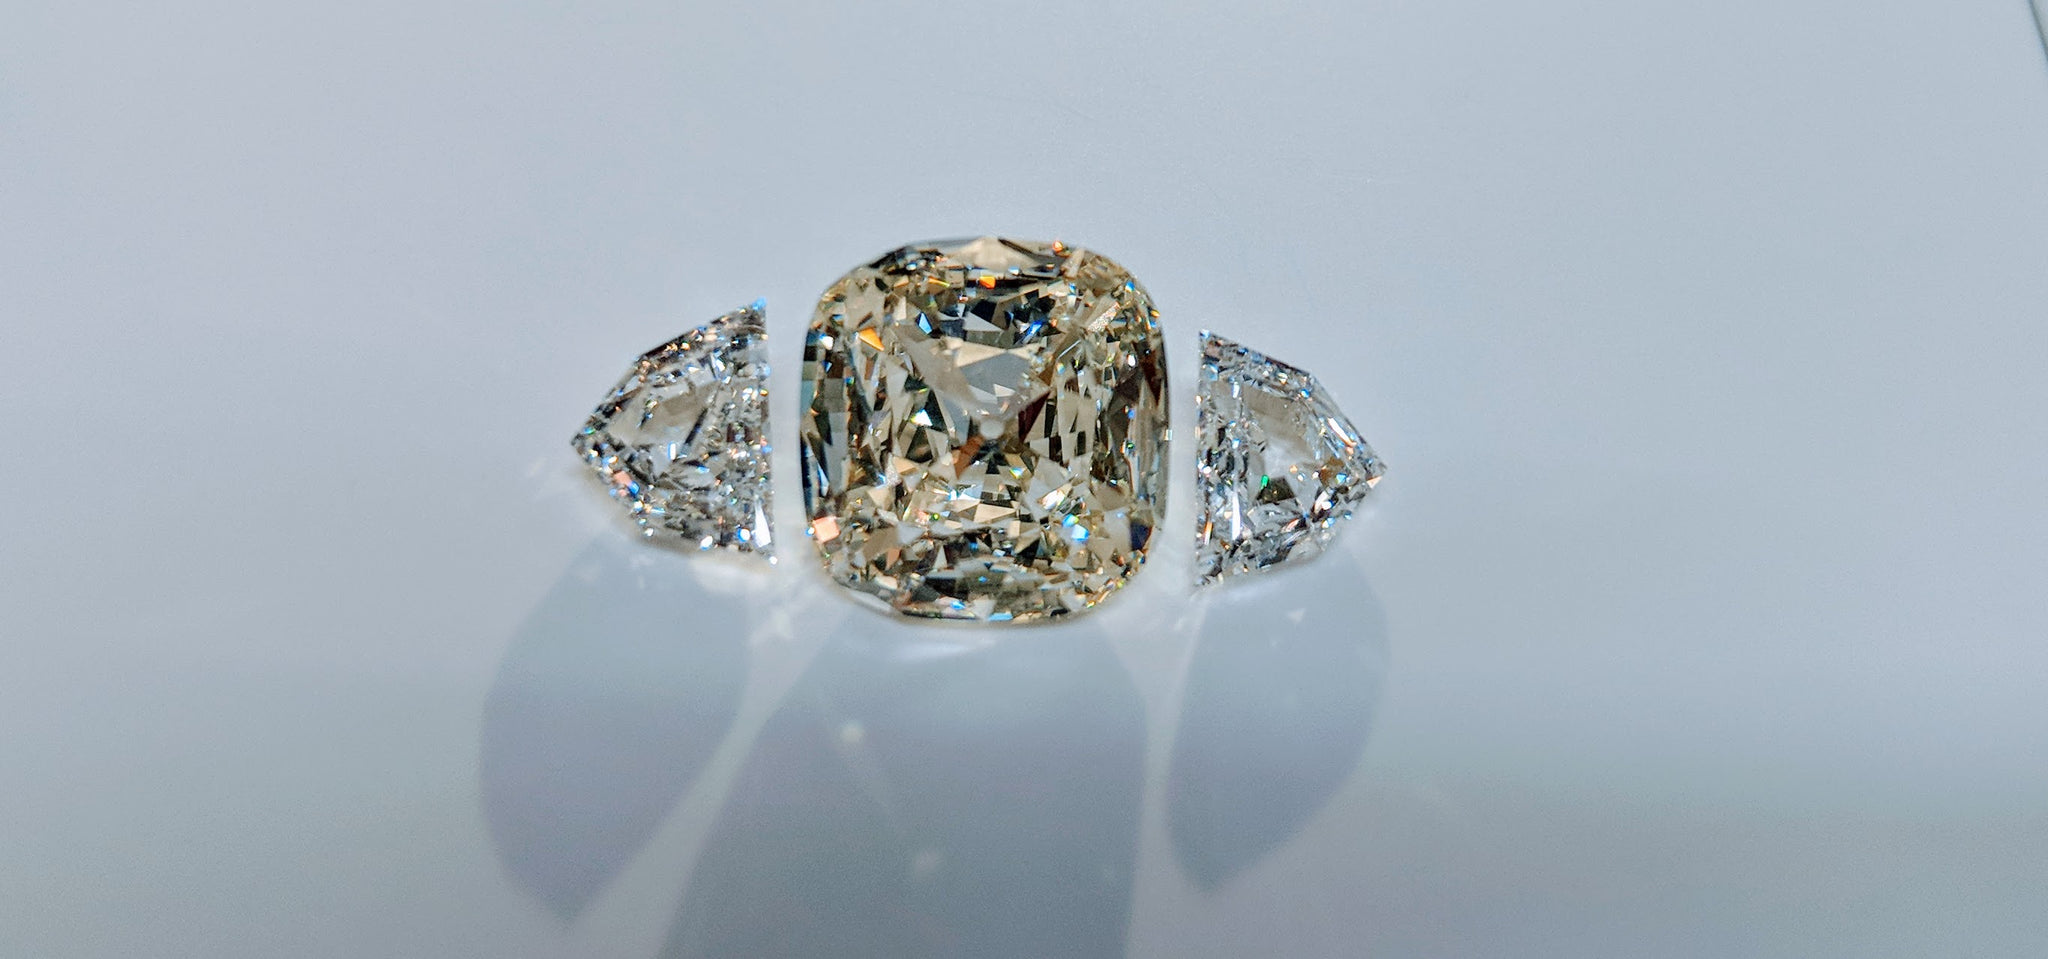 64Facets Diamond Setting with Two Half Shield Step-Cut Diamonds as Side Stones